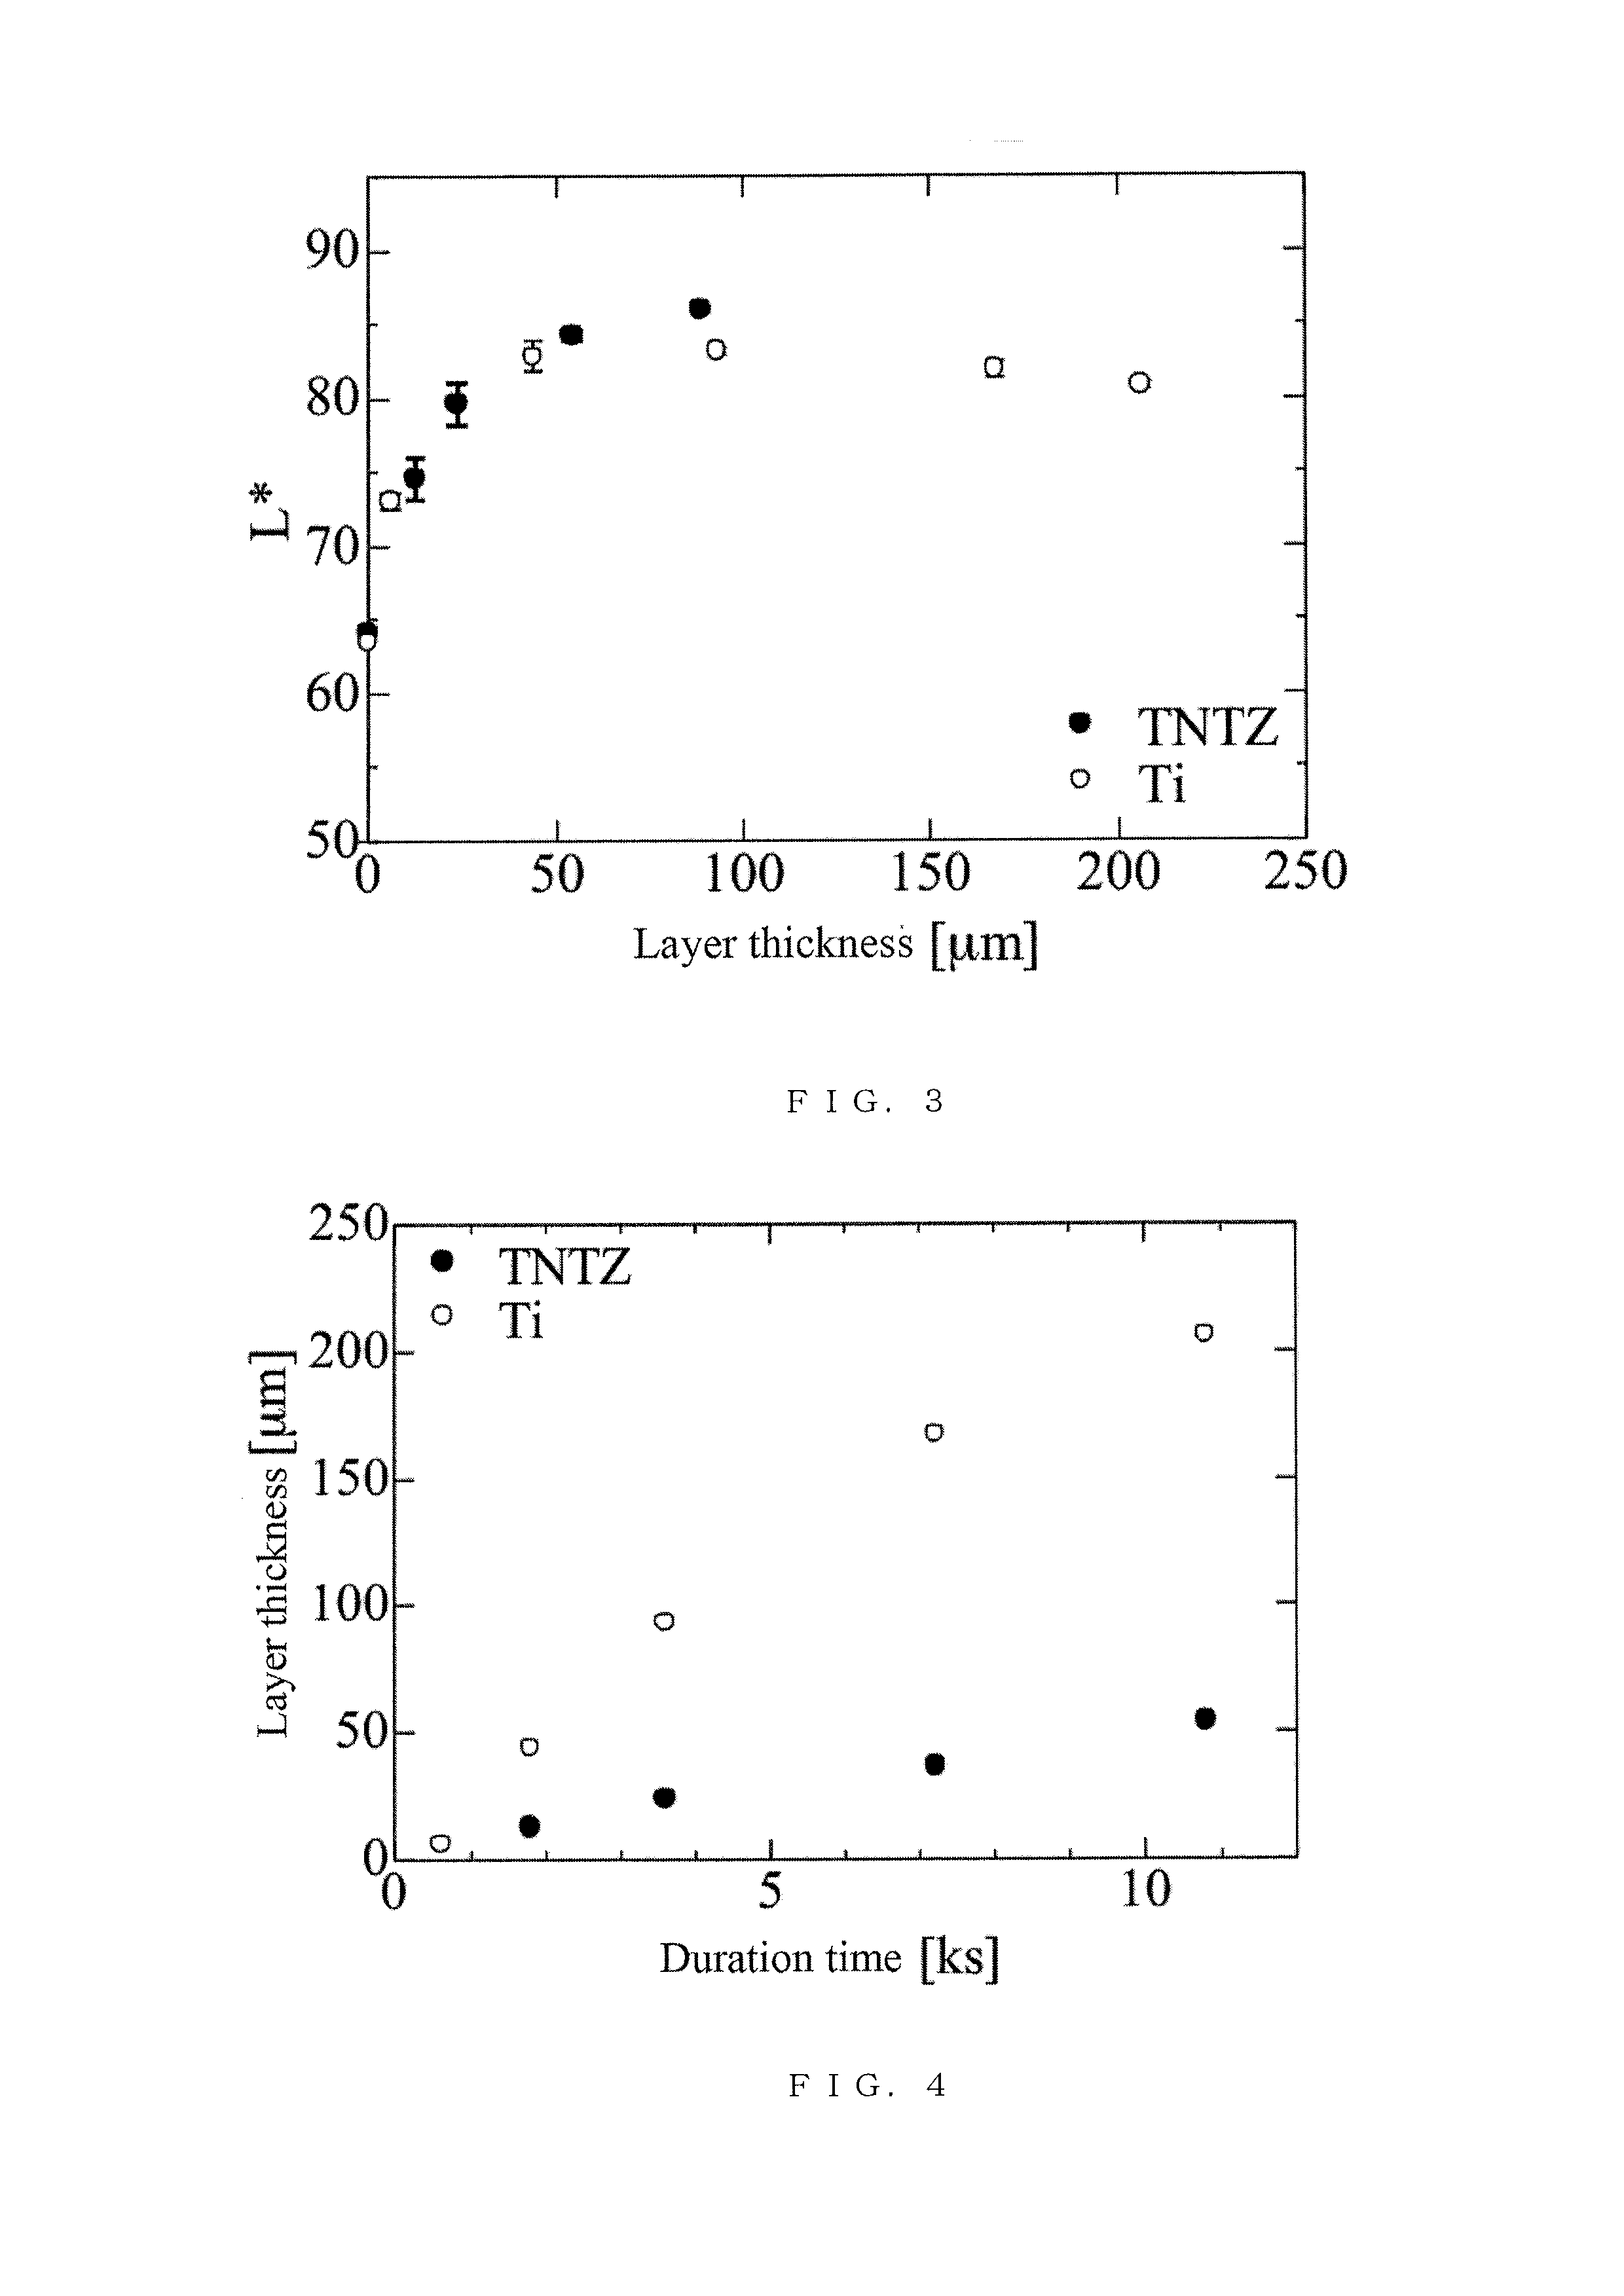 Composite material for dental prosthesis and method for manufacturing the same